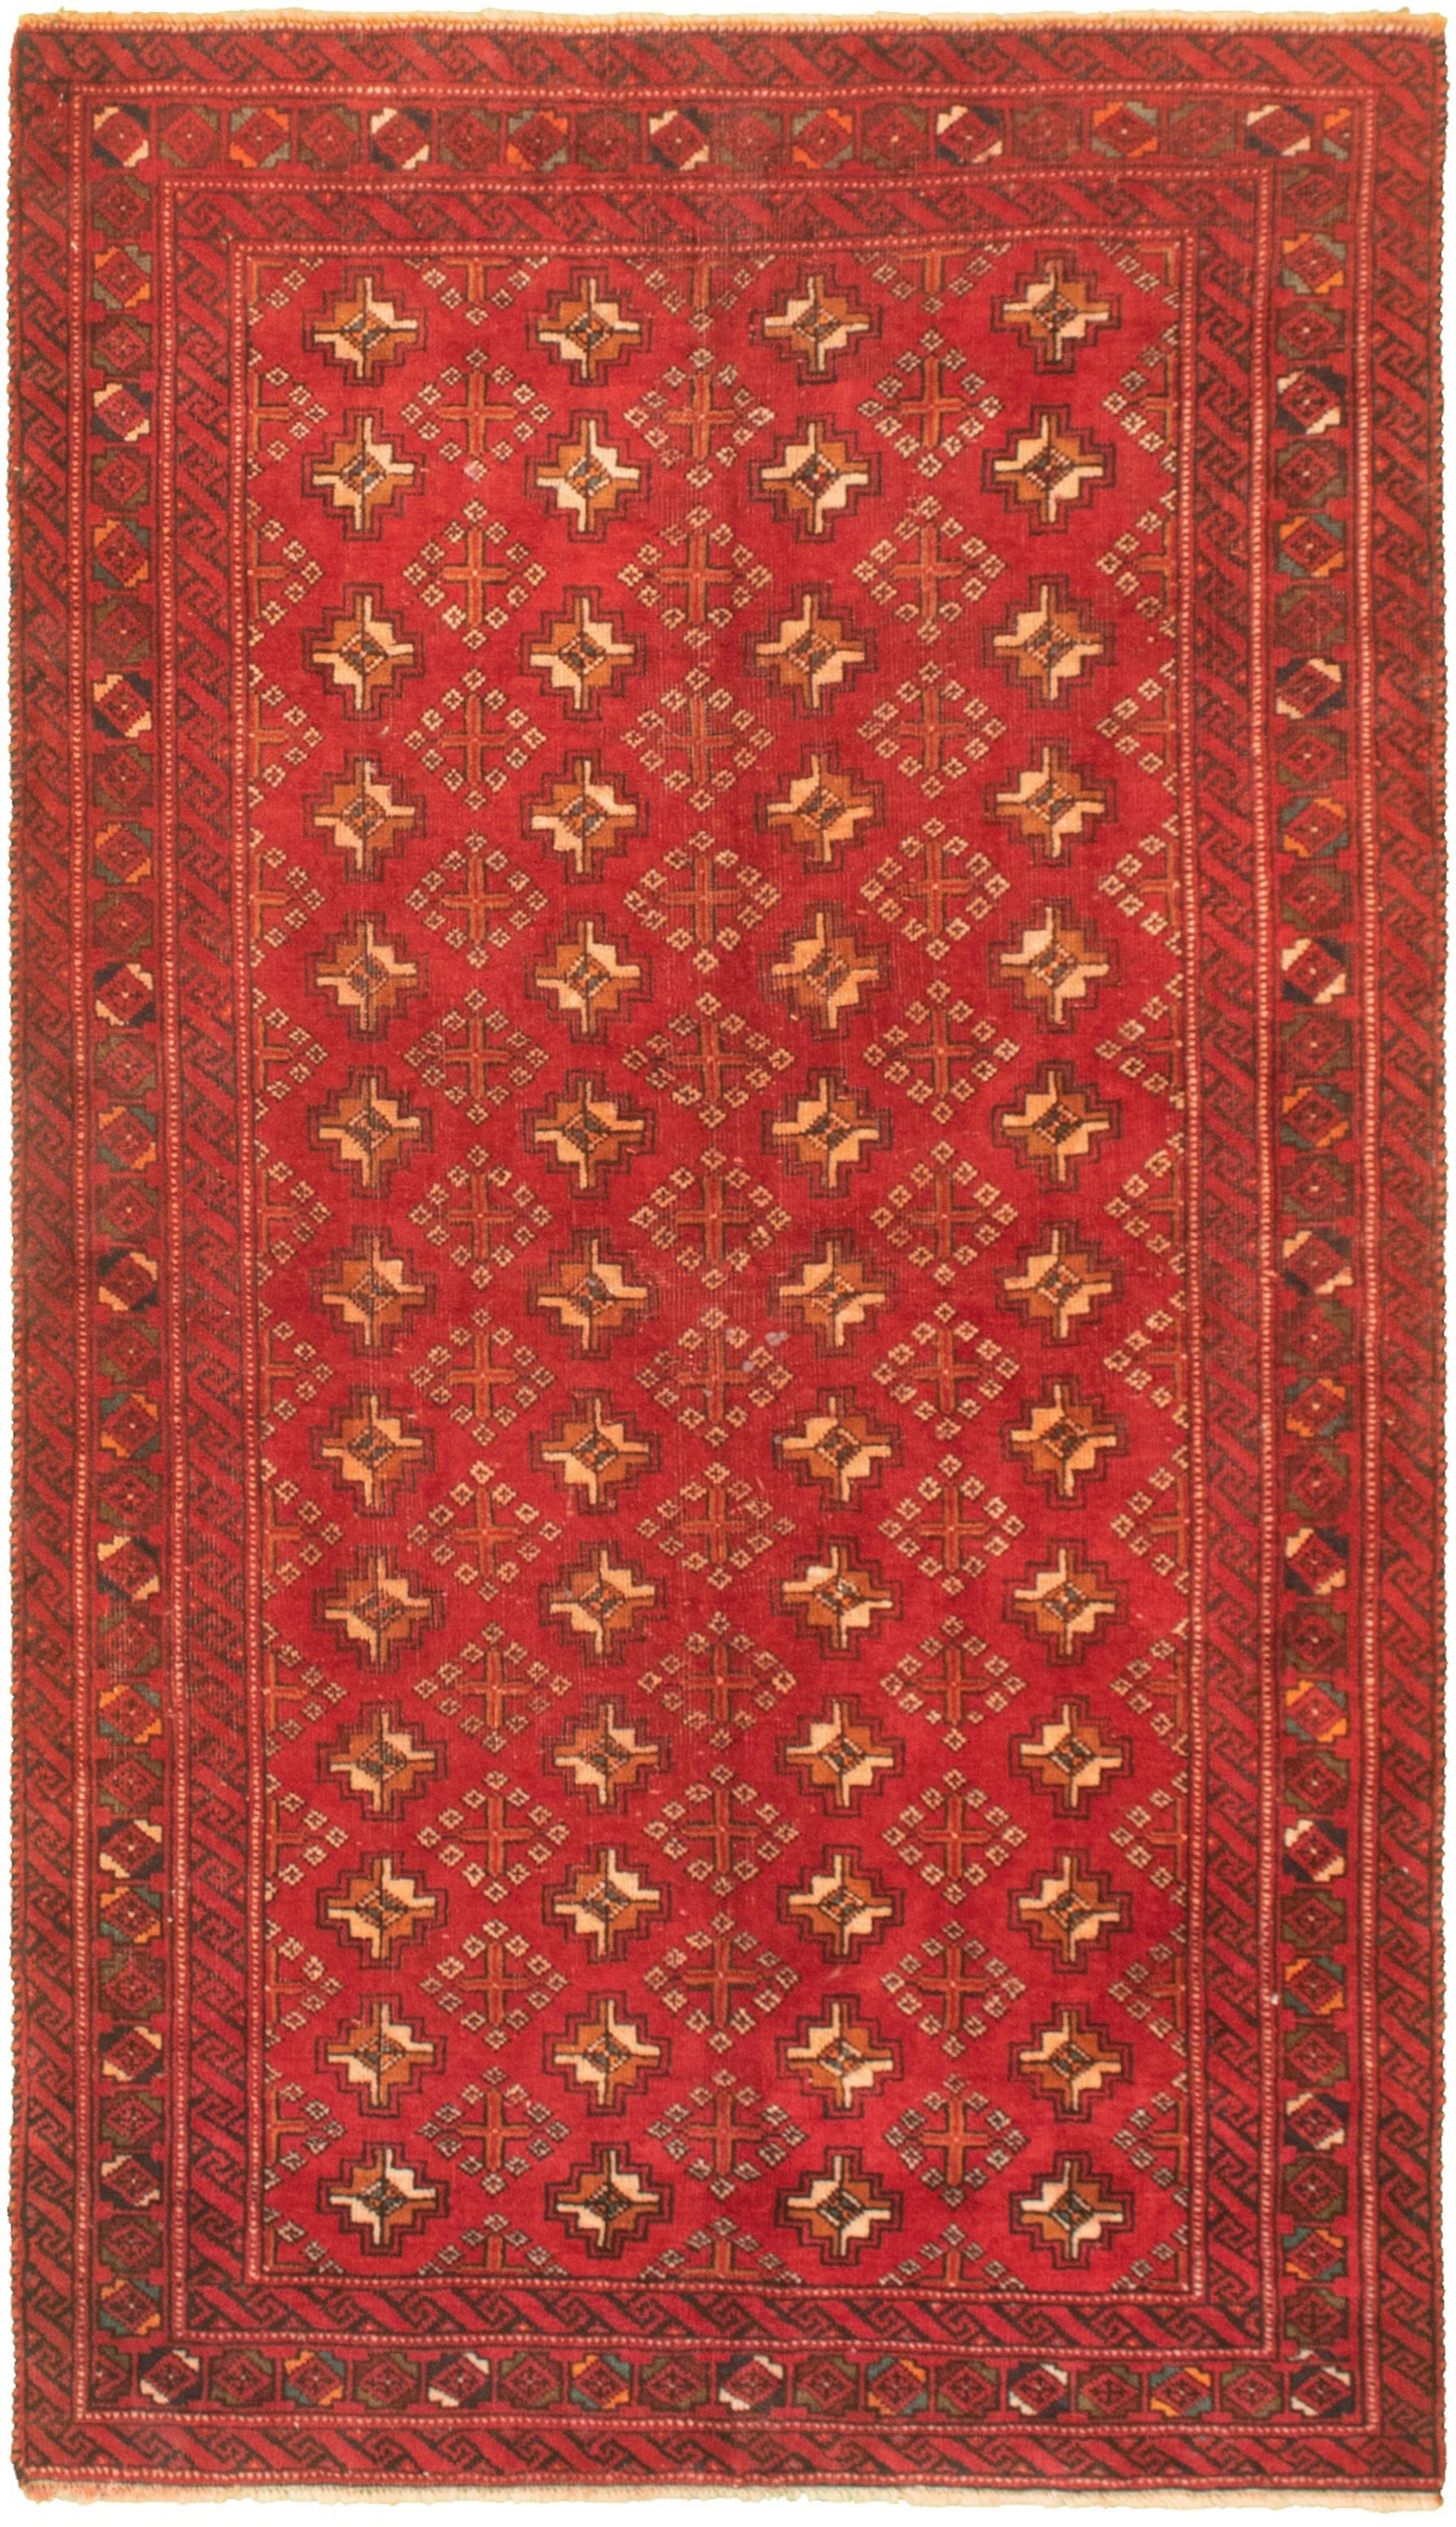 Hand-knotted Authentic Turkish Red Wool Rug 3'6" x 6'4" Size: 3'6" x 6'4"  